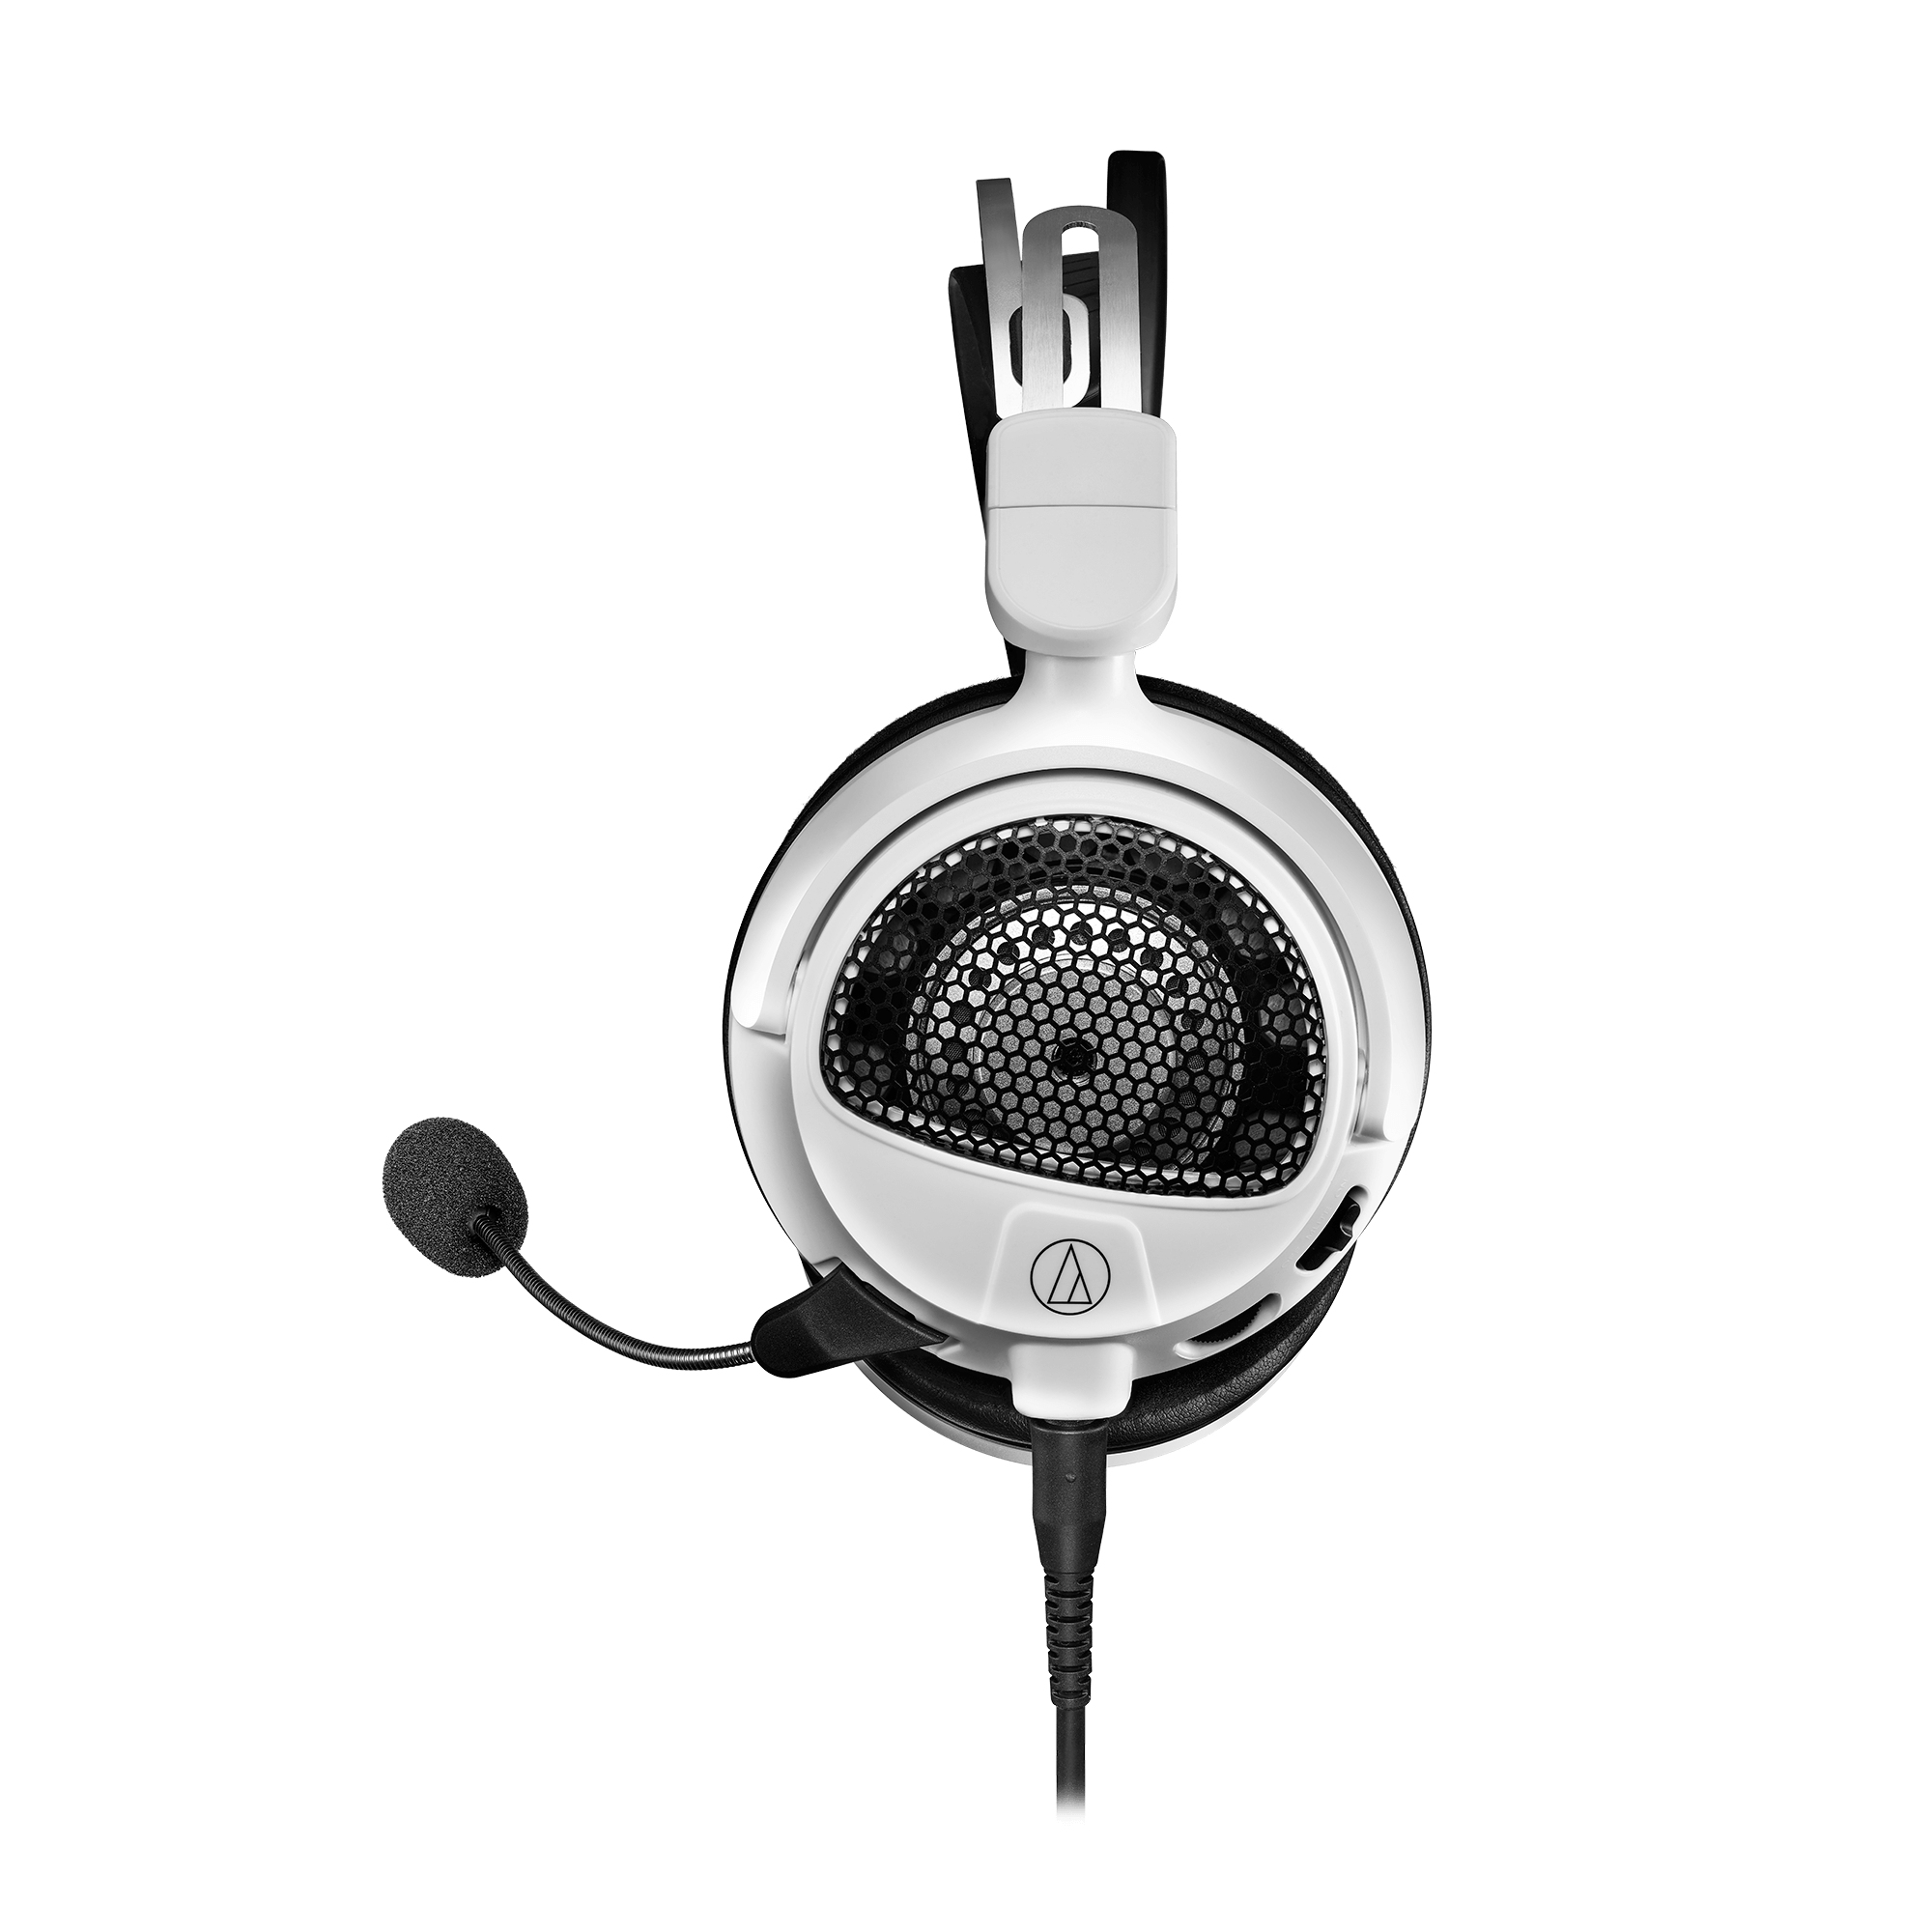 Audio-Technica ATH-GDL3 Gaming-Headset - weiß